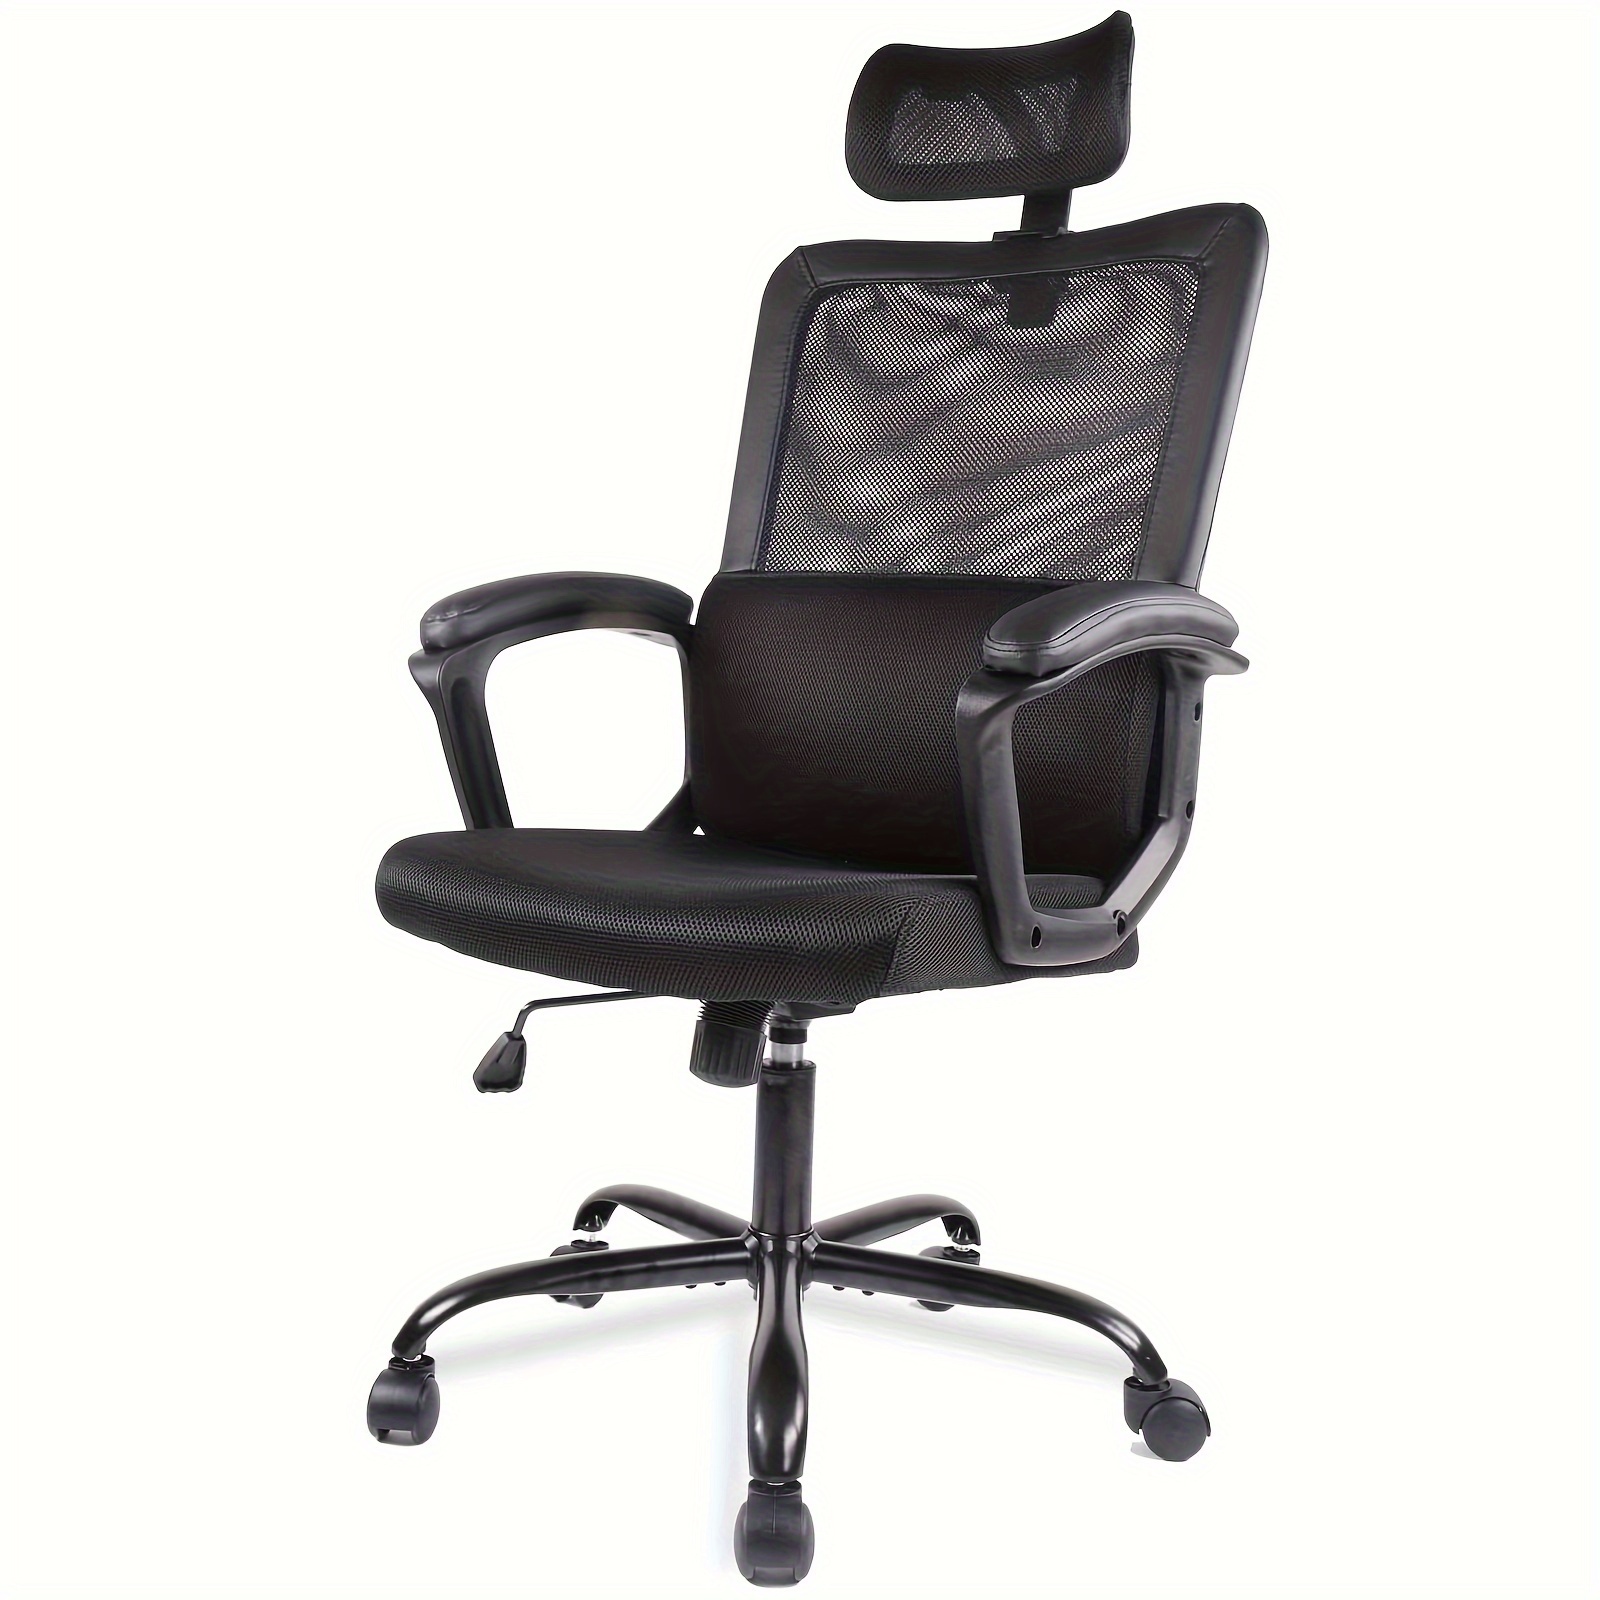 

Office Desk Computer Chair, Ergonomic High Back Comfy Swivel Gaming Home Mesh Chairs With Wheels, Lumbar Support, Adjustable Headrest, Comfortable Pillow, Soft Arms, 120°tilt For Bedroom, Study